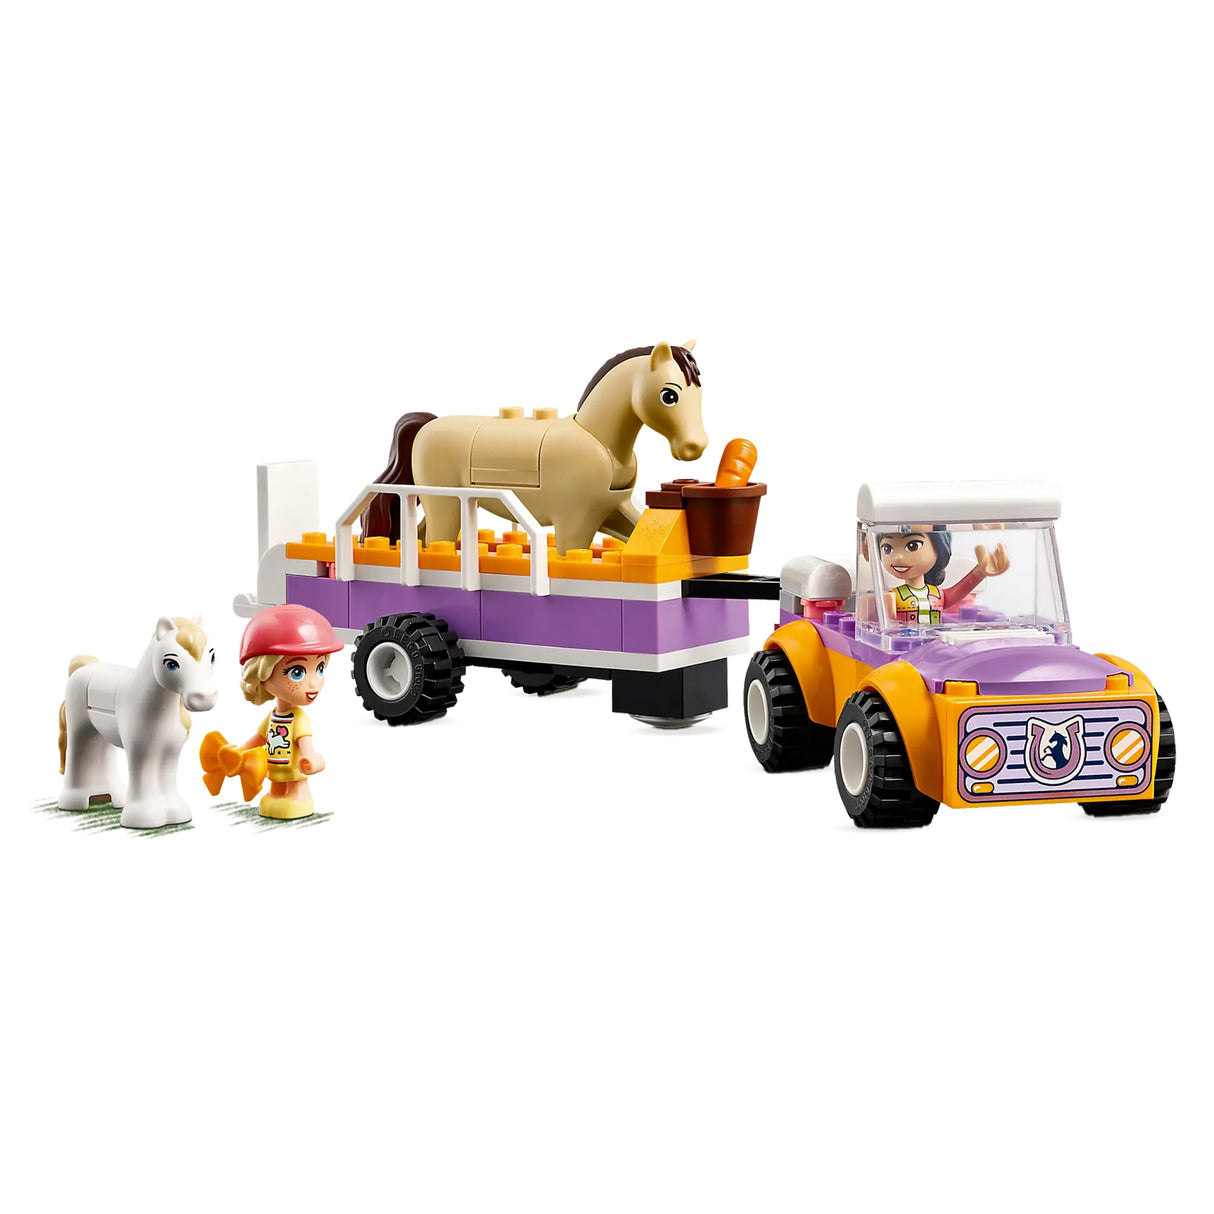 LEGO Friends Horse and Pony Trailer 42634, (105-pieces)